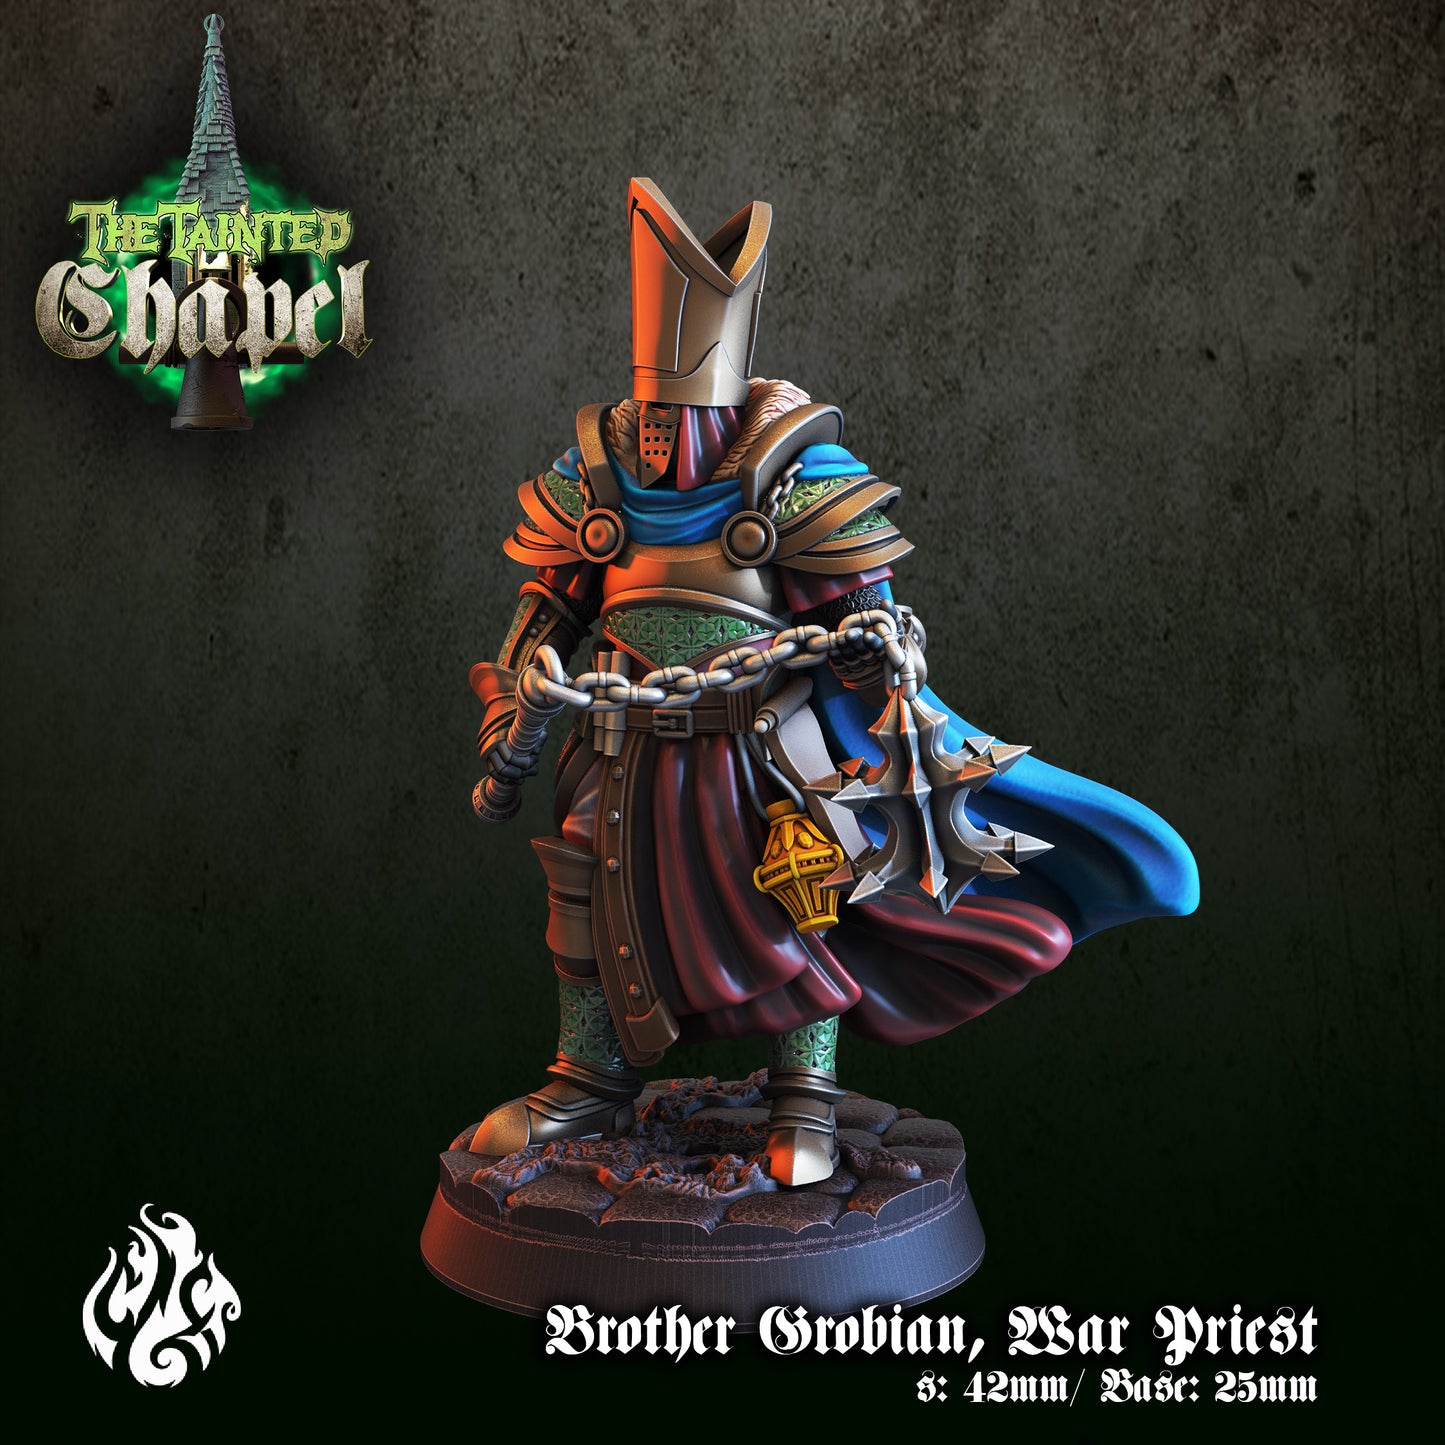 Grobian War Priest - The Tainted Chapel Series from Crippled God Foundry - Table-top gaming mini and collectable for painting.